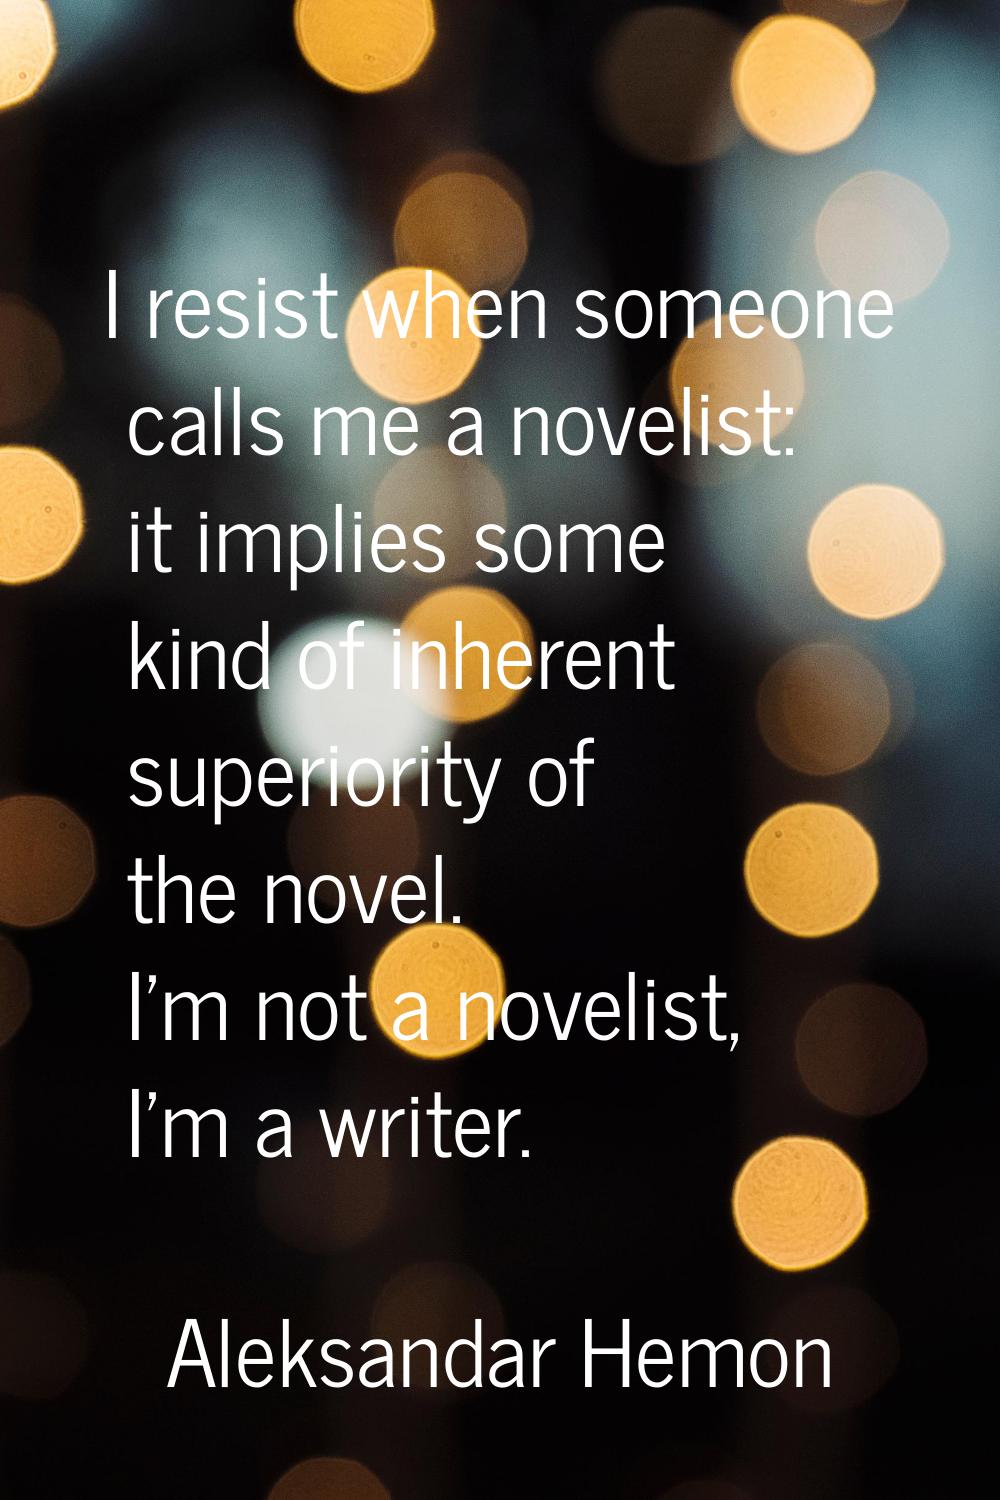 I resist when someone calls me a novelist: it implies some kind of inherent superiority of the nove